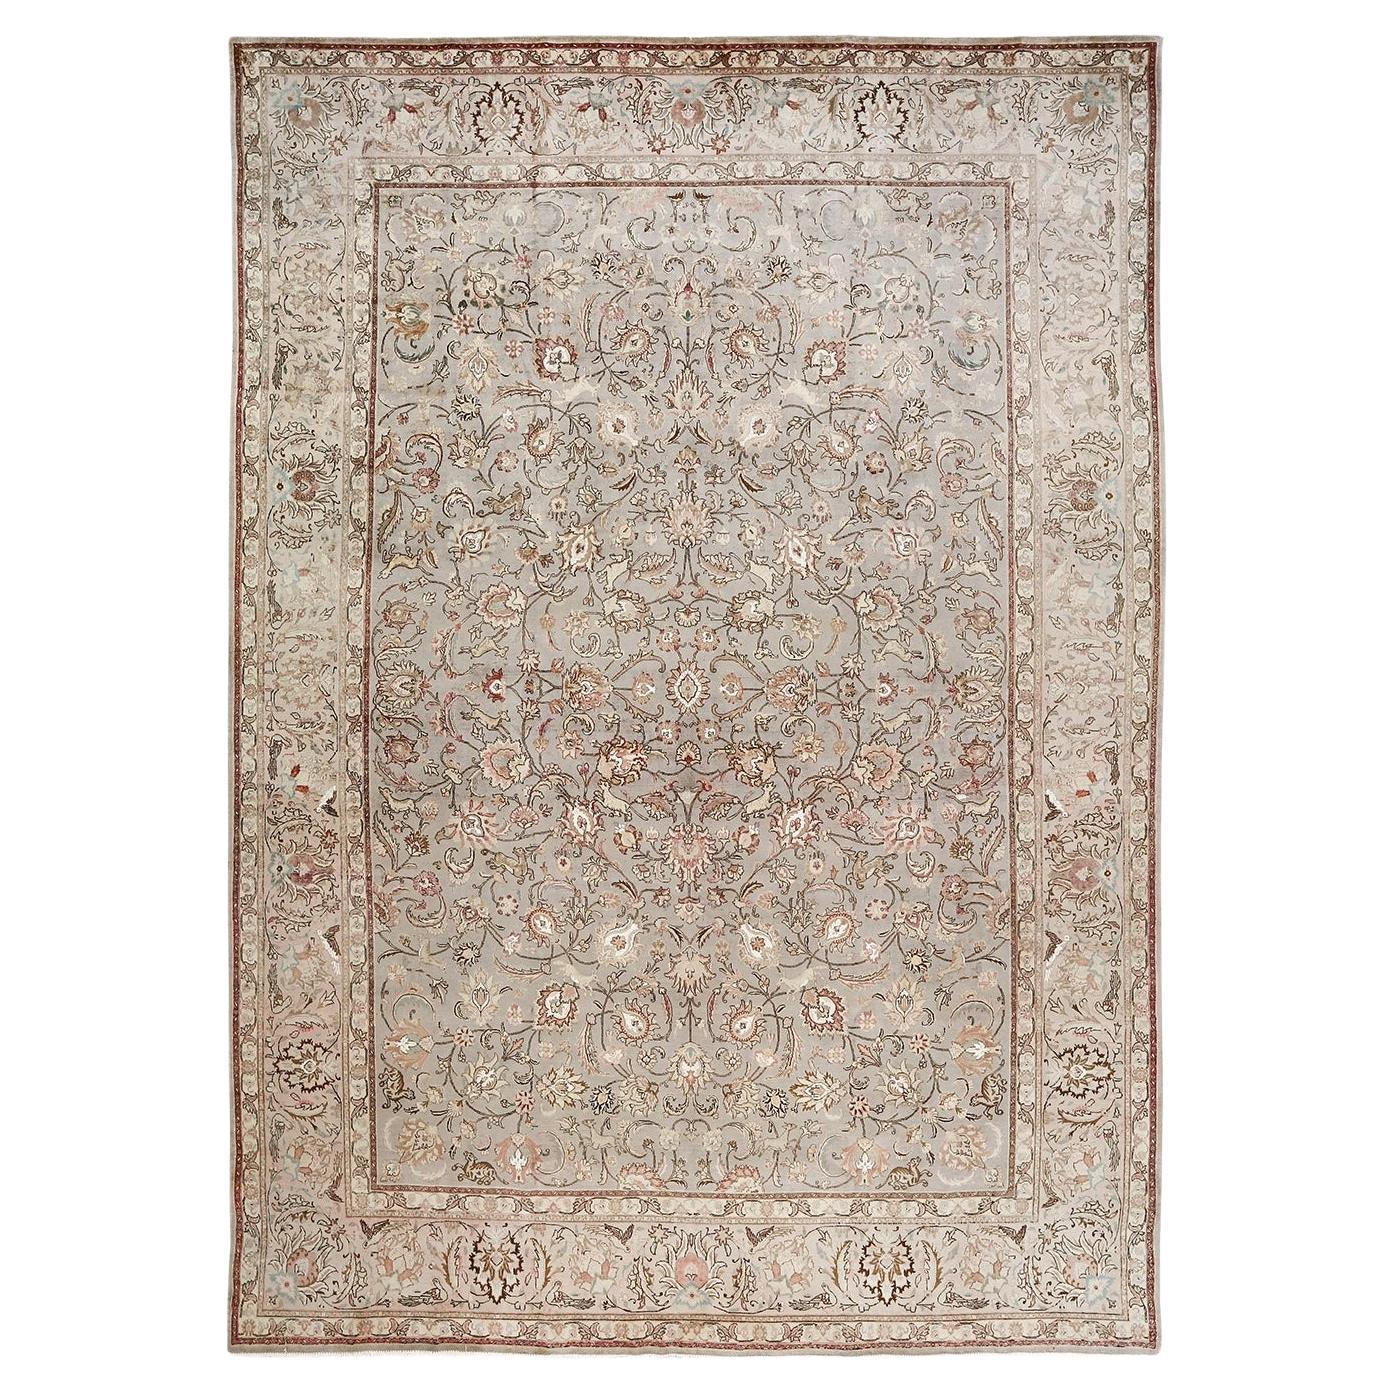 Vintage Persian Tabriz - Size: 11 ft 7 in x 8 ft 2 in